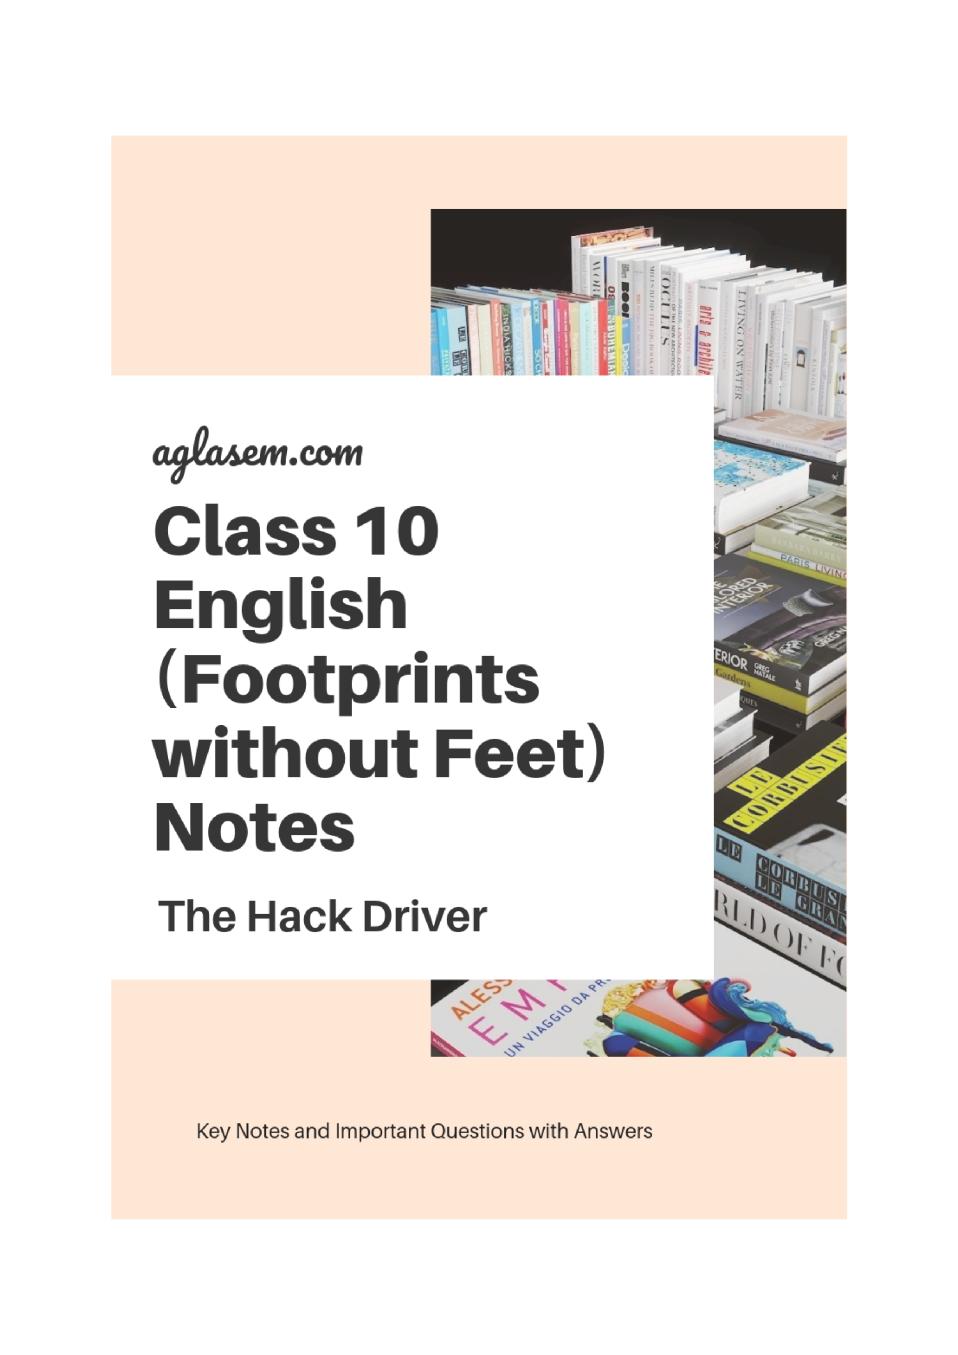 Class 10 English Footprints without Feet Notes For The Hack Driver - Page 1